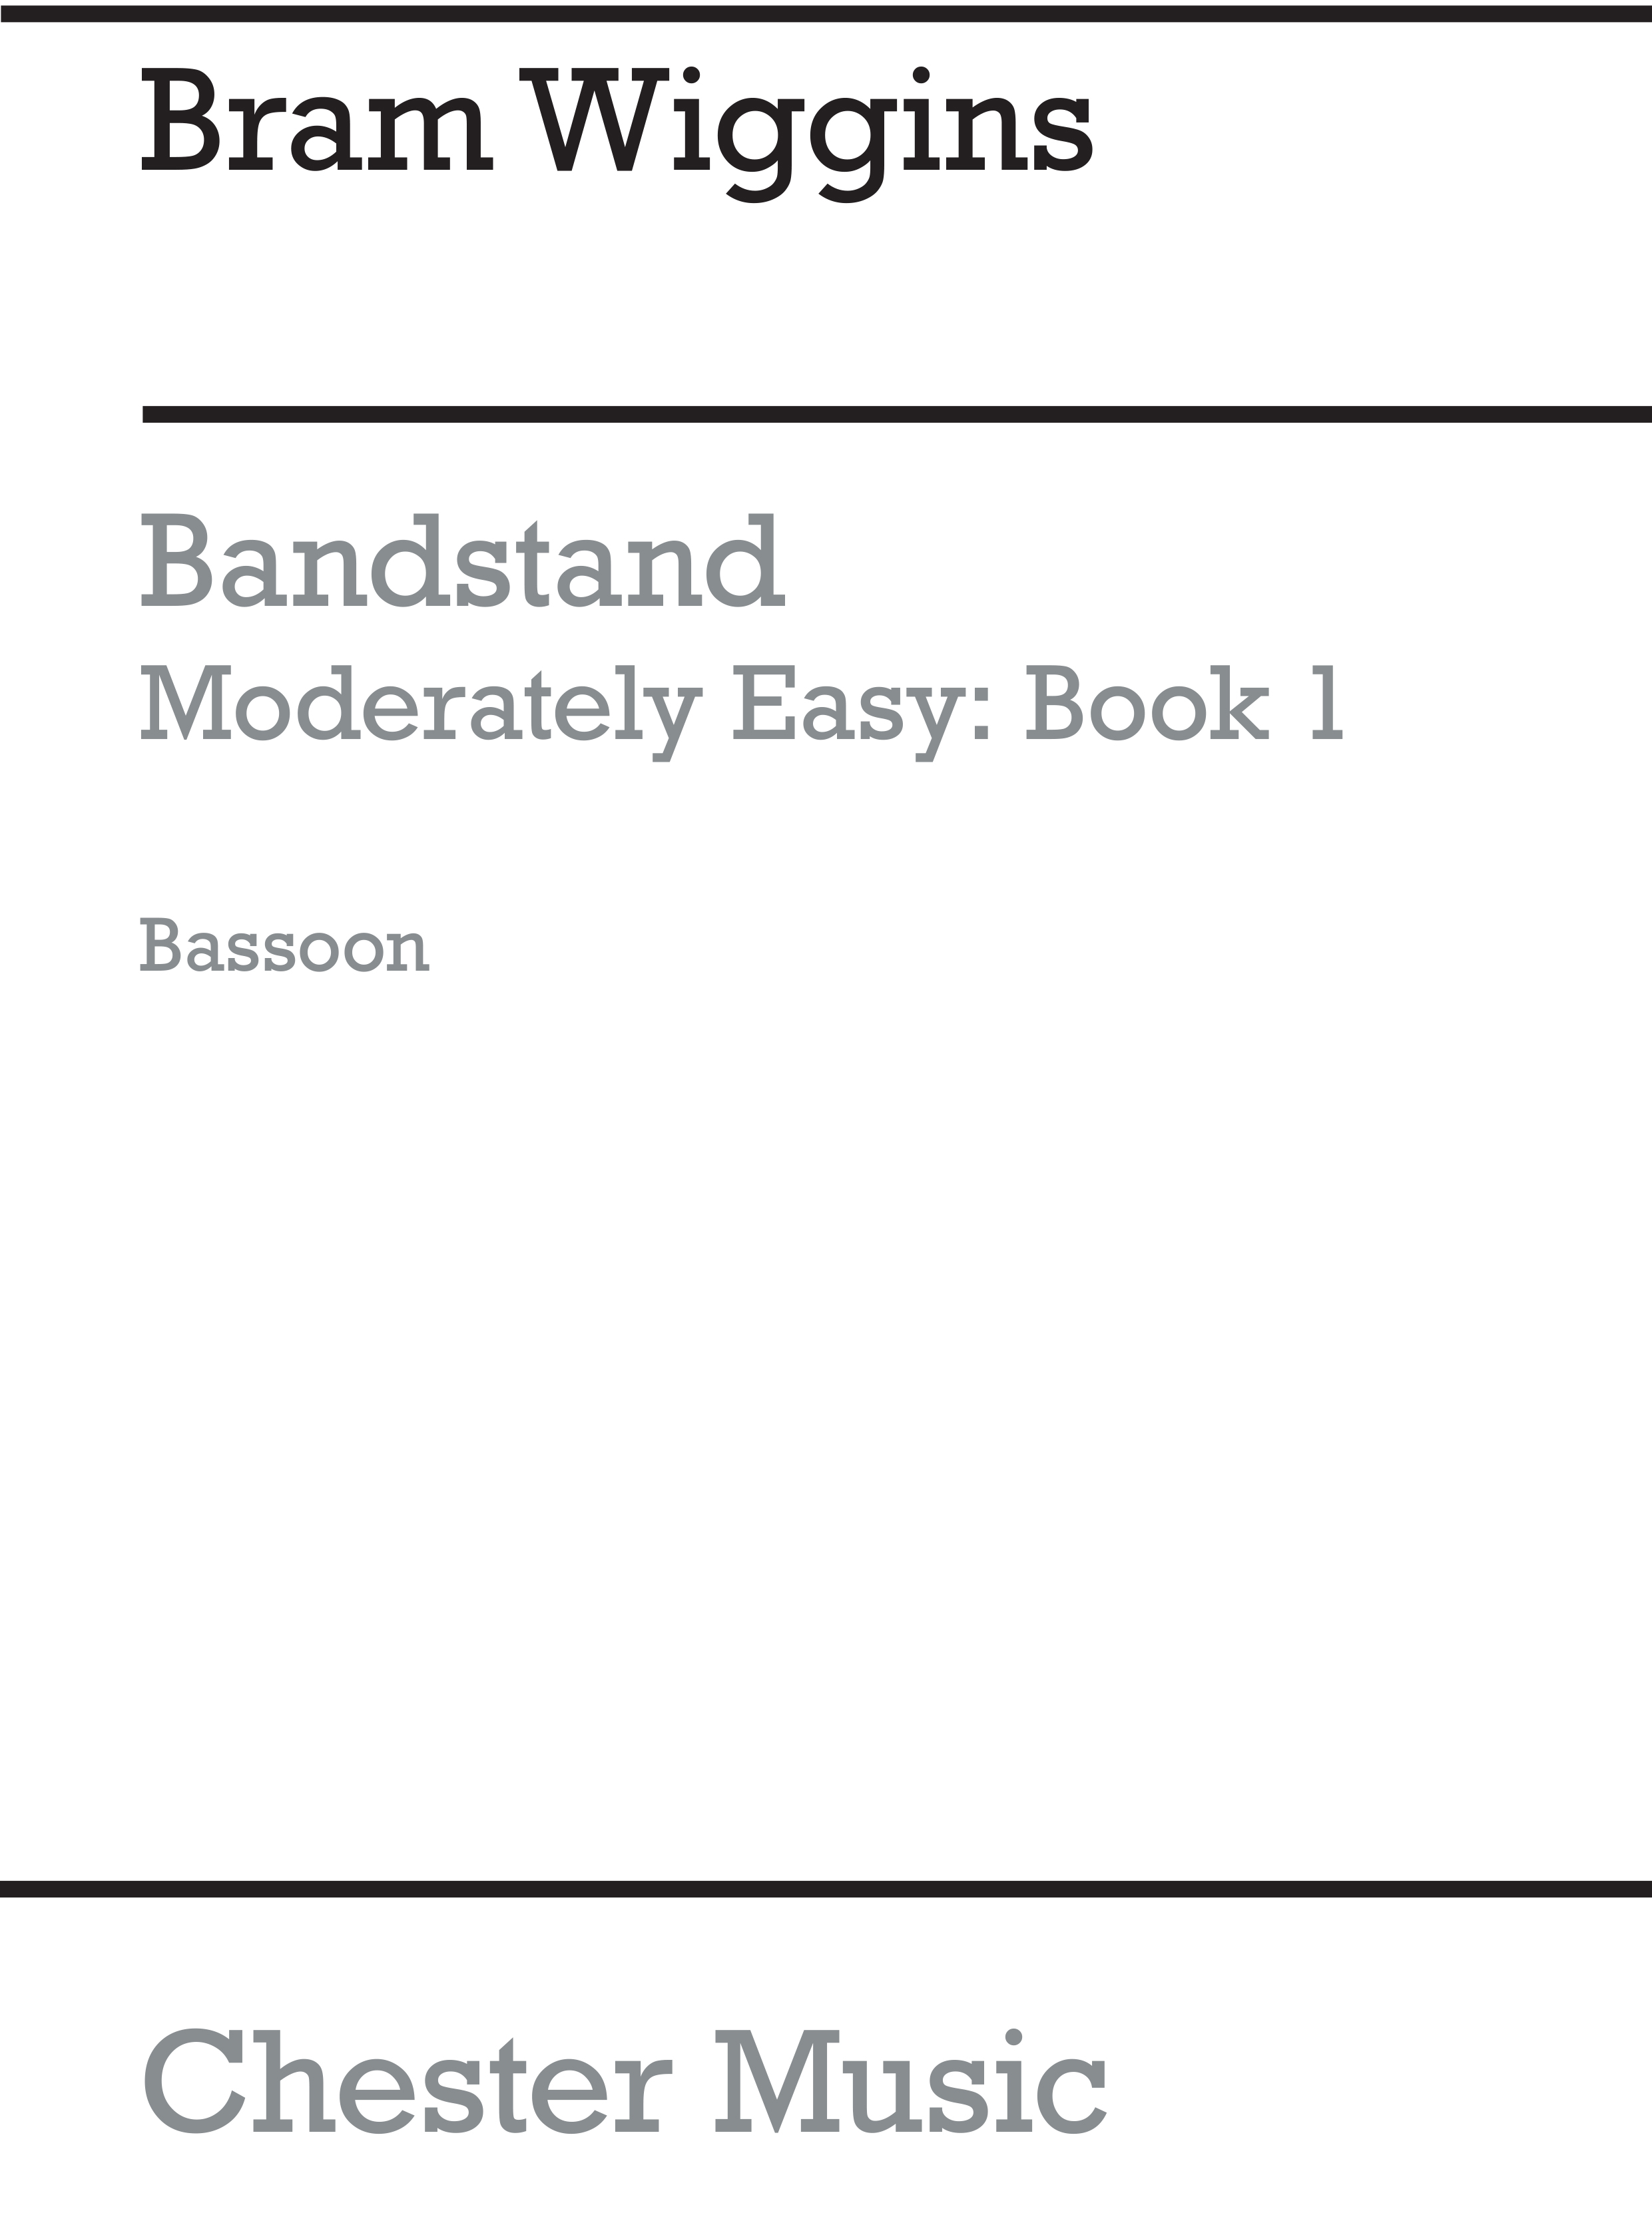 Bram Wiggins: Bandstand Moderately Easy Book 1 (Bassoon): Concert Band: Part